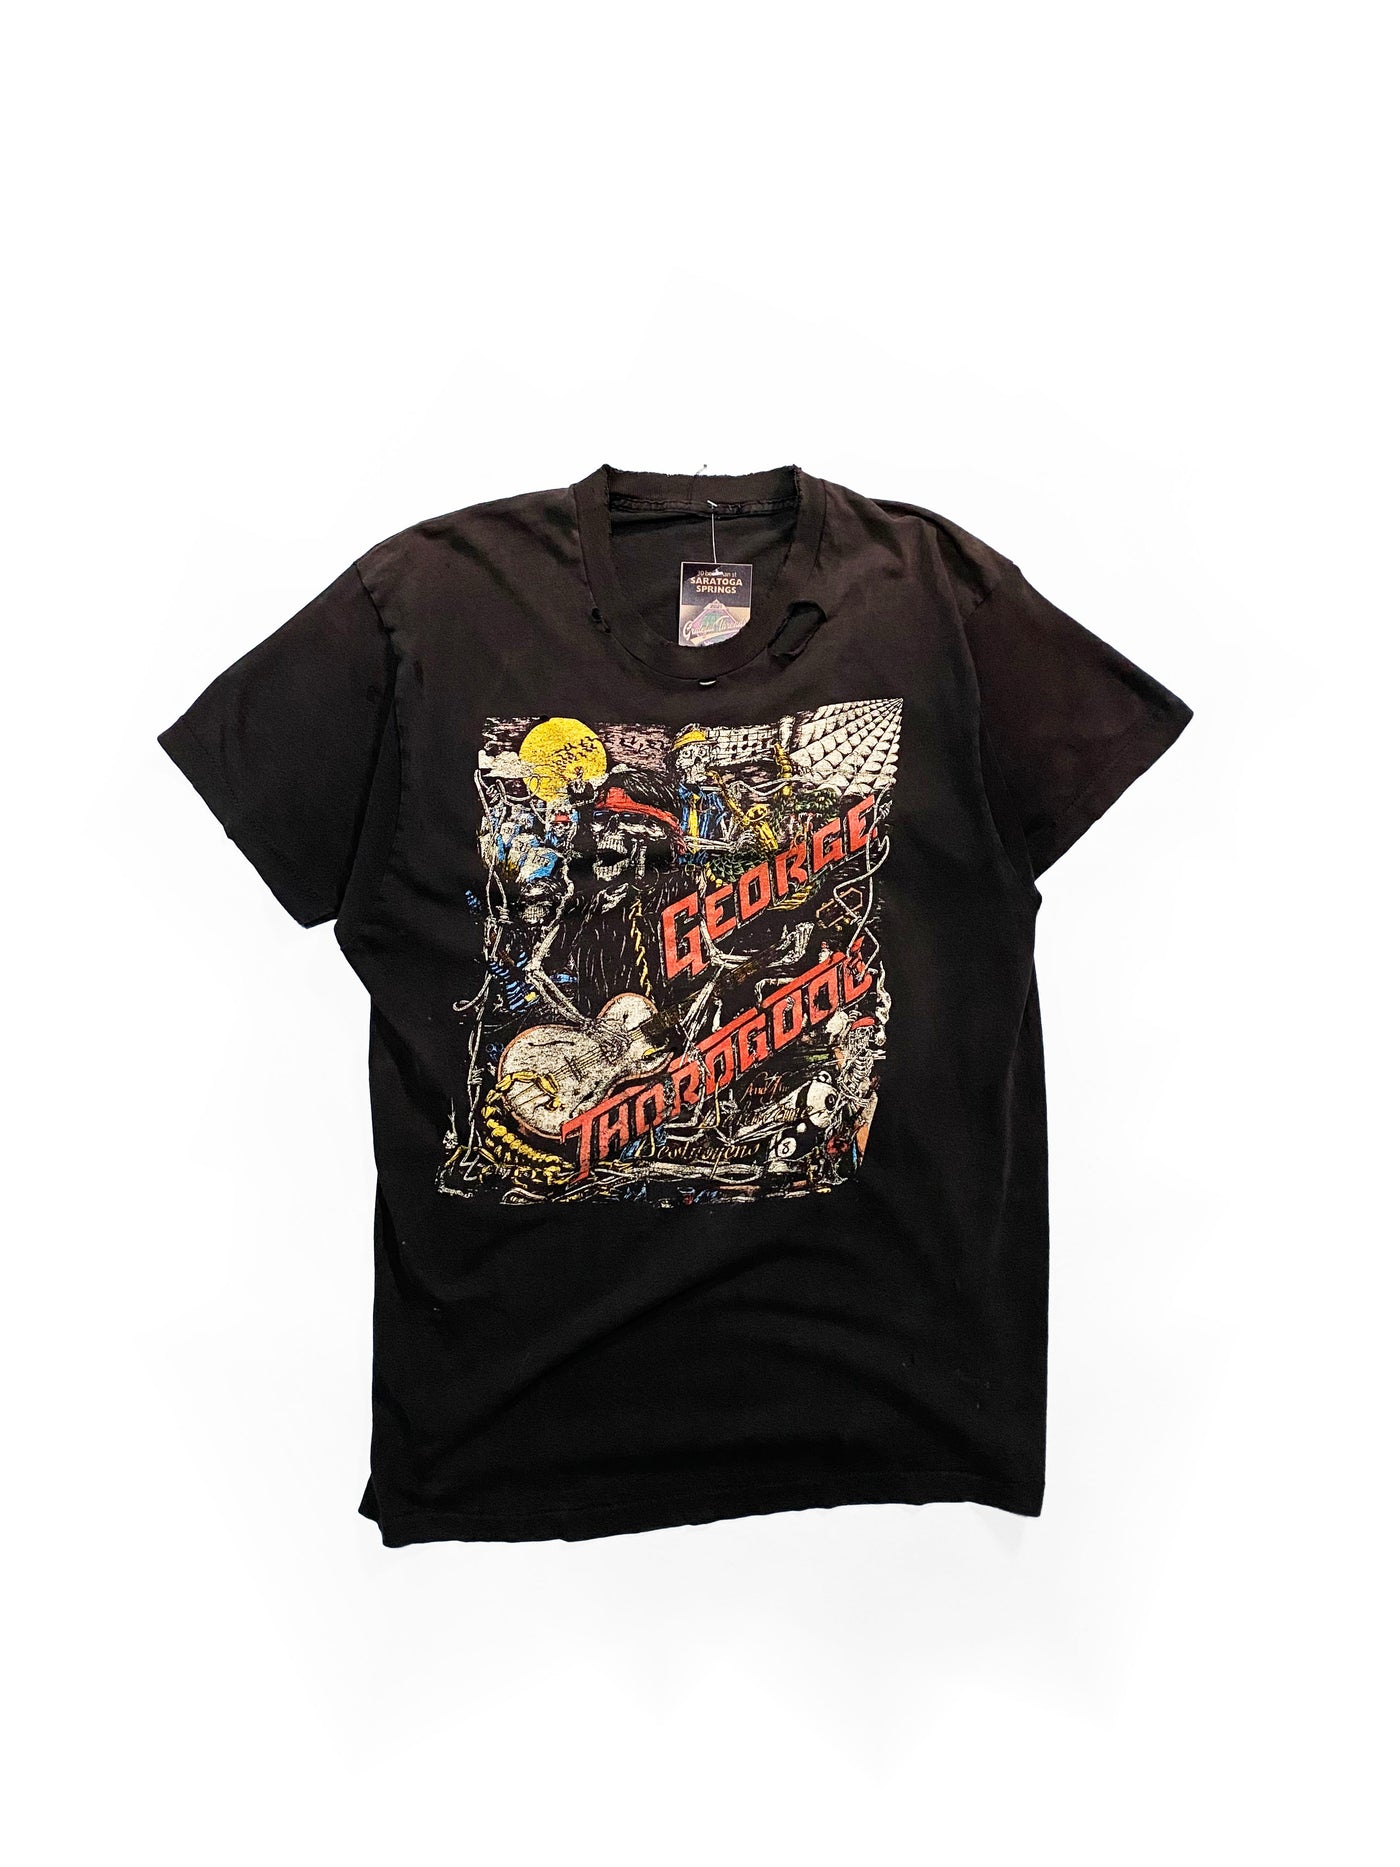 Vintage 80s George Thorogood & the Destroyers Distressed T-Shirt